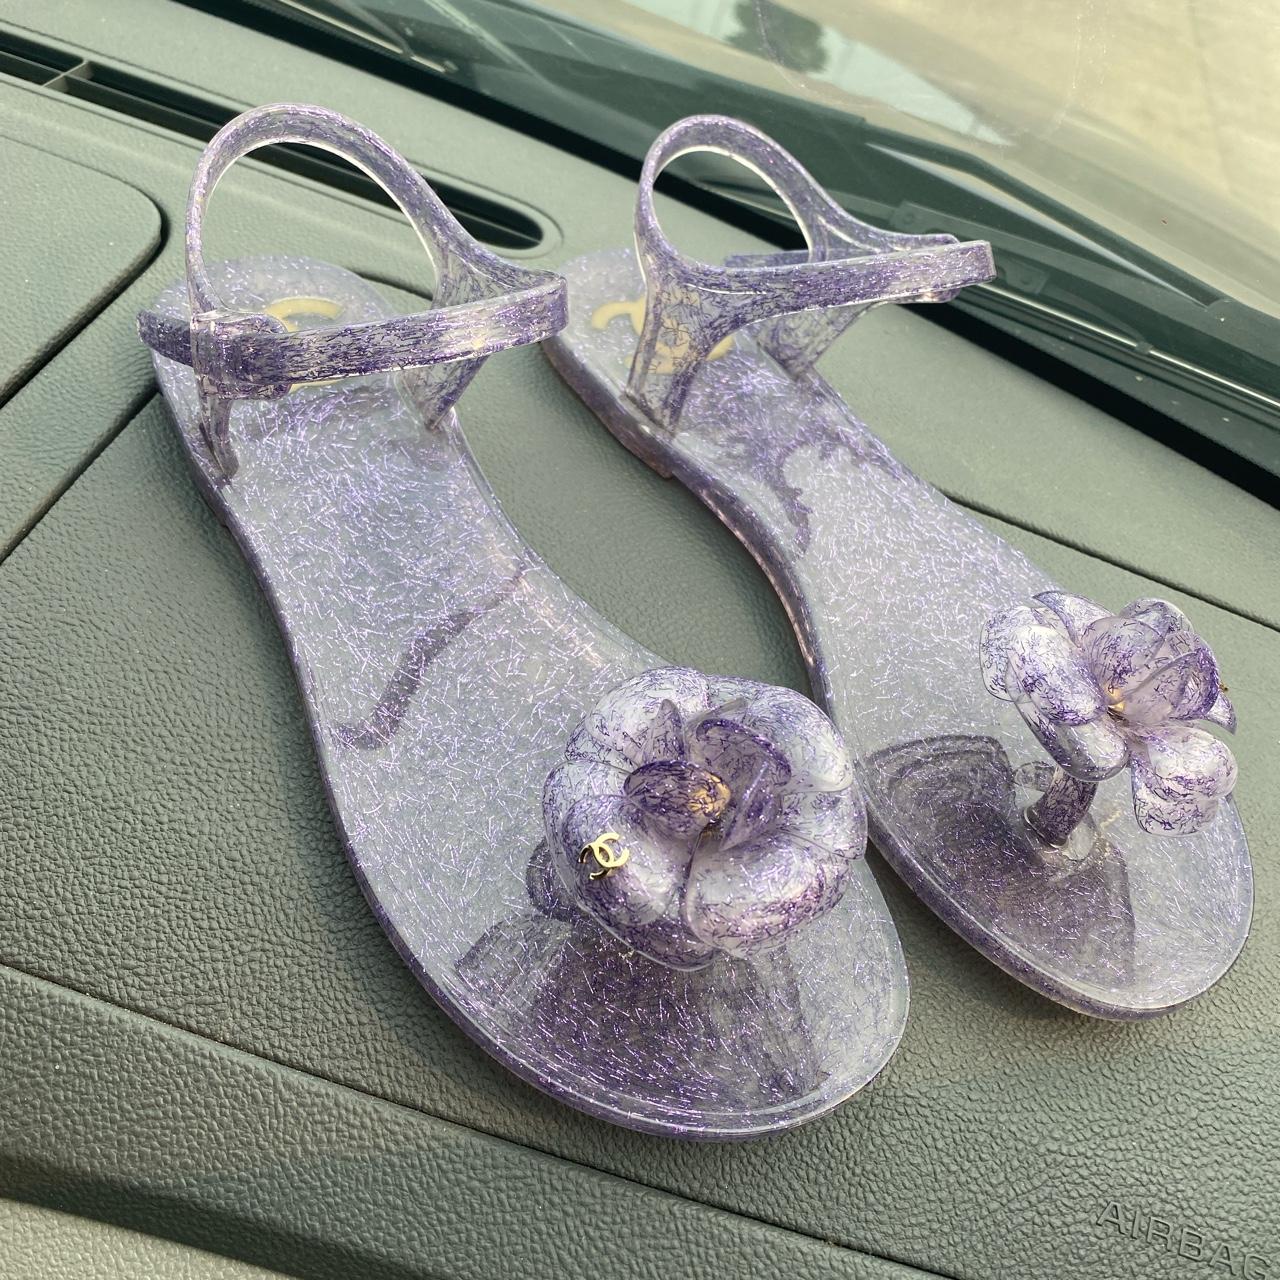 CHANEL CAMELLIA JELLY SANDALS😱🥵 , Absolutely